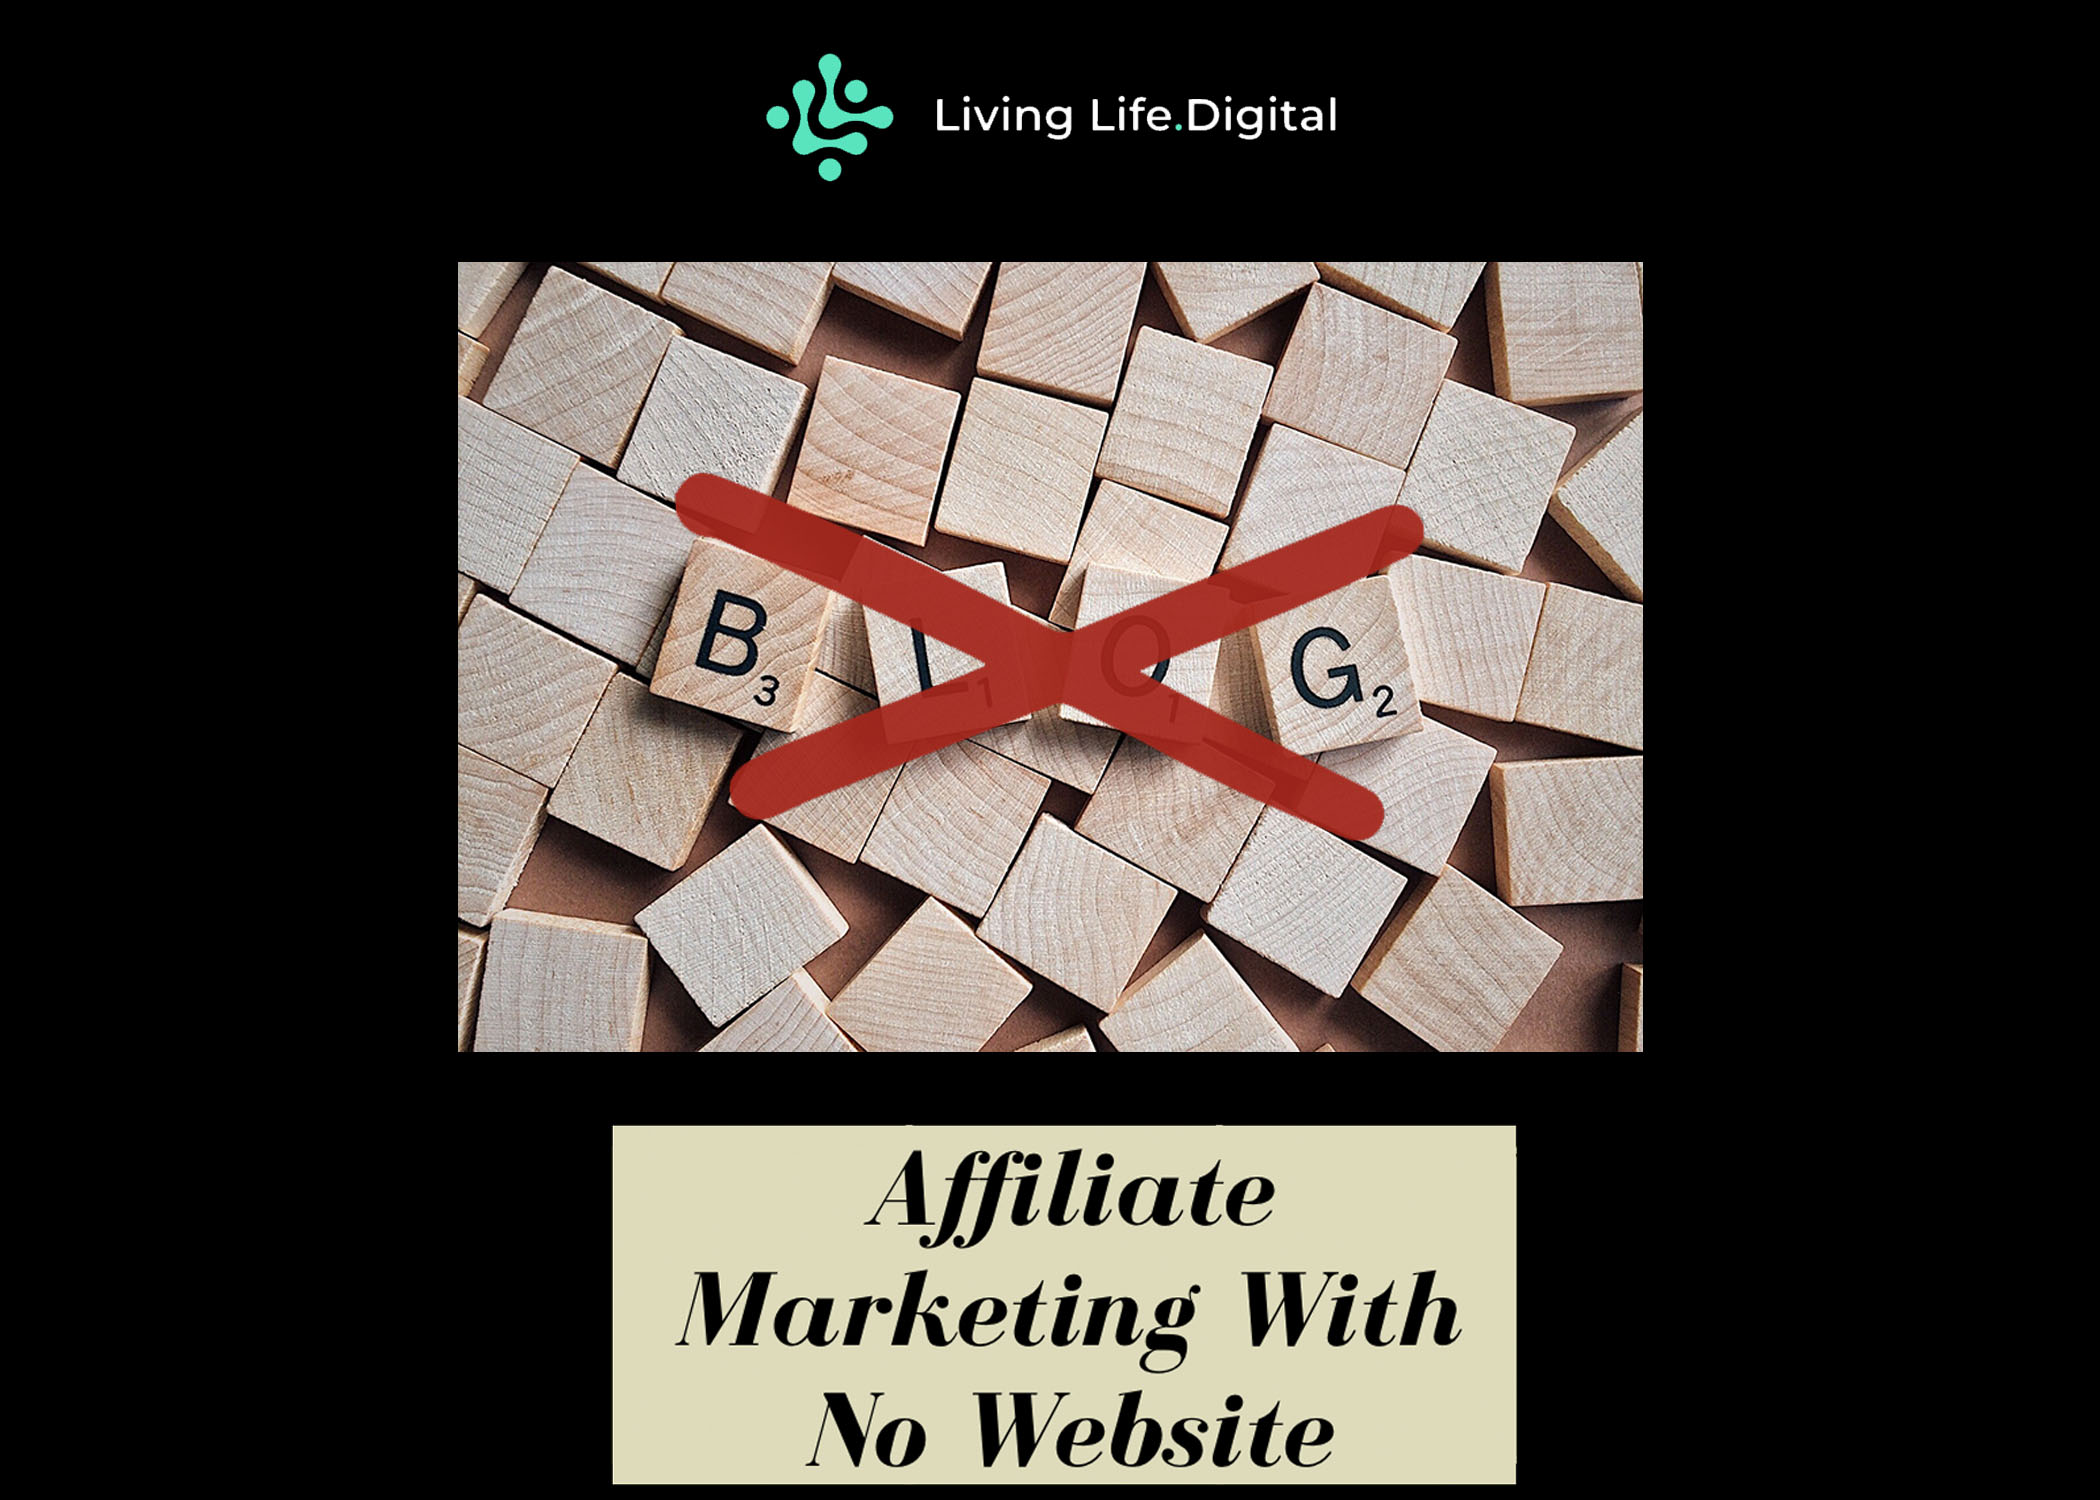 Affiliate Marketing Without a Website